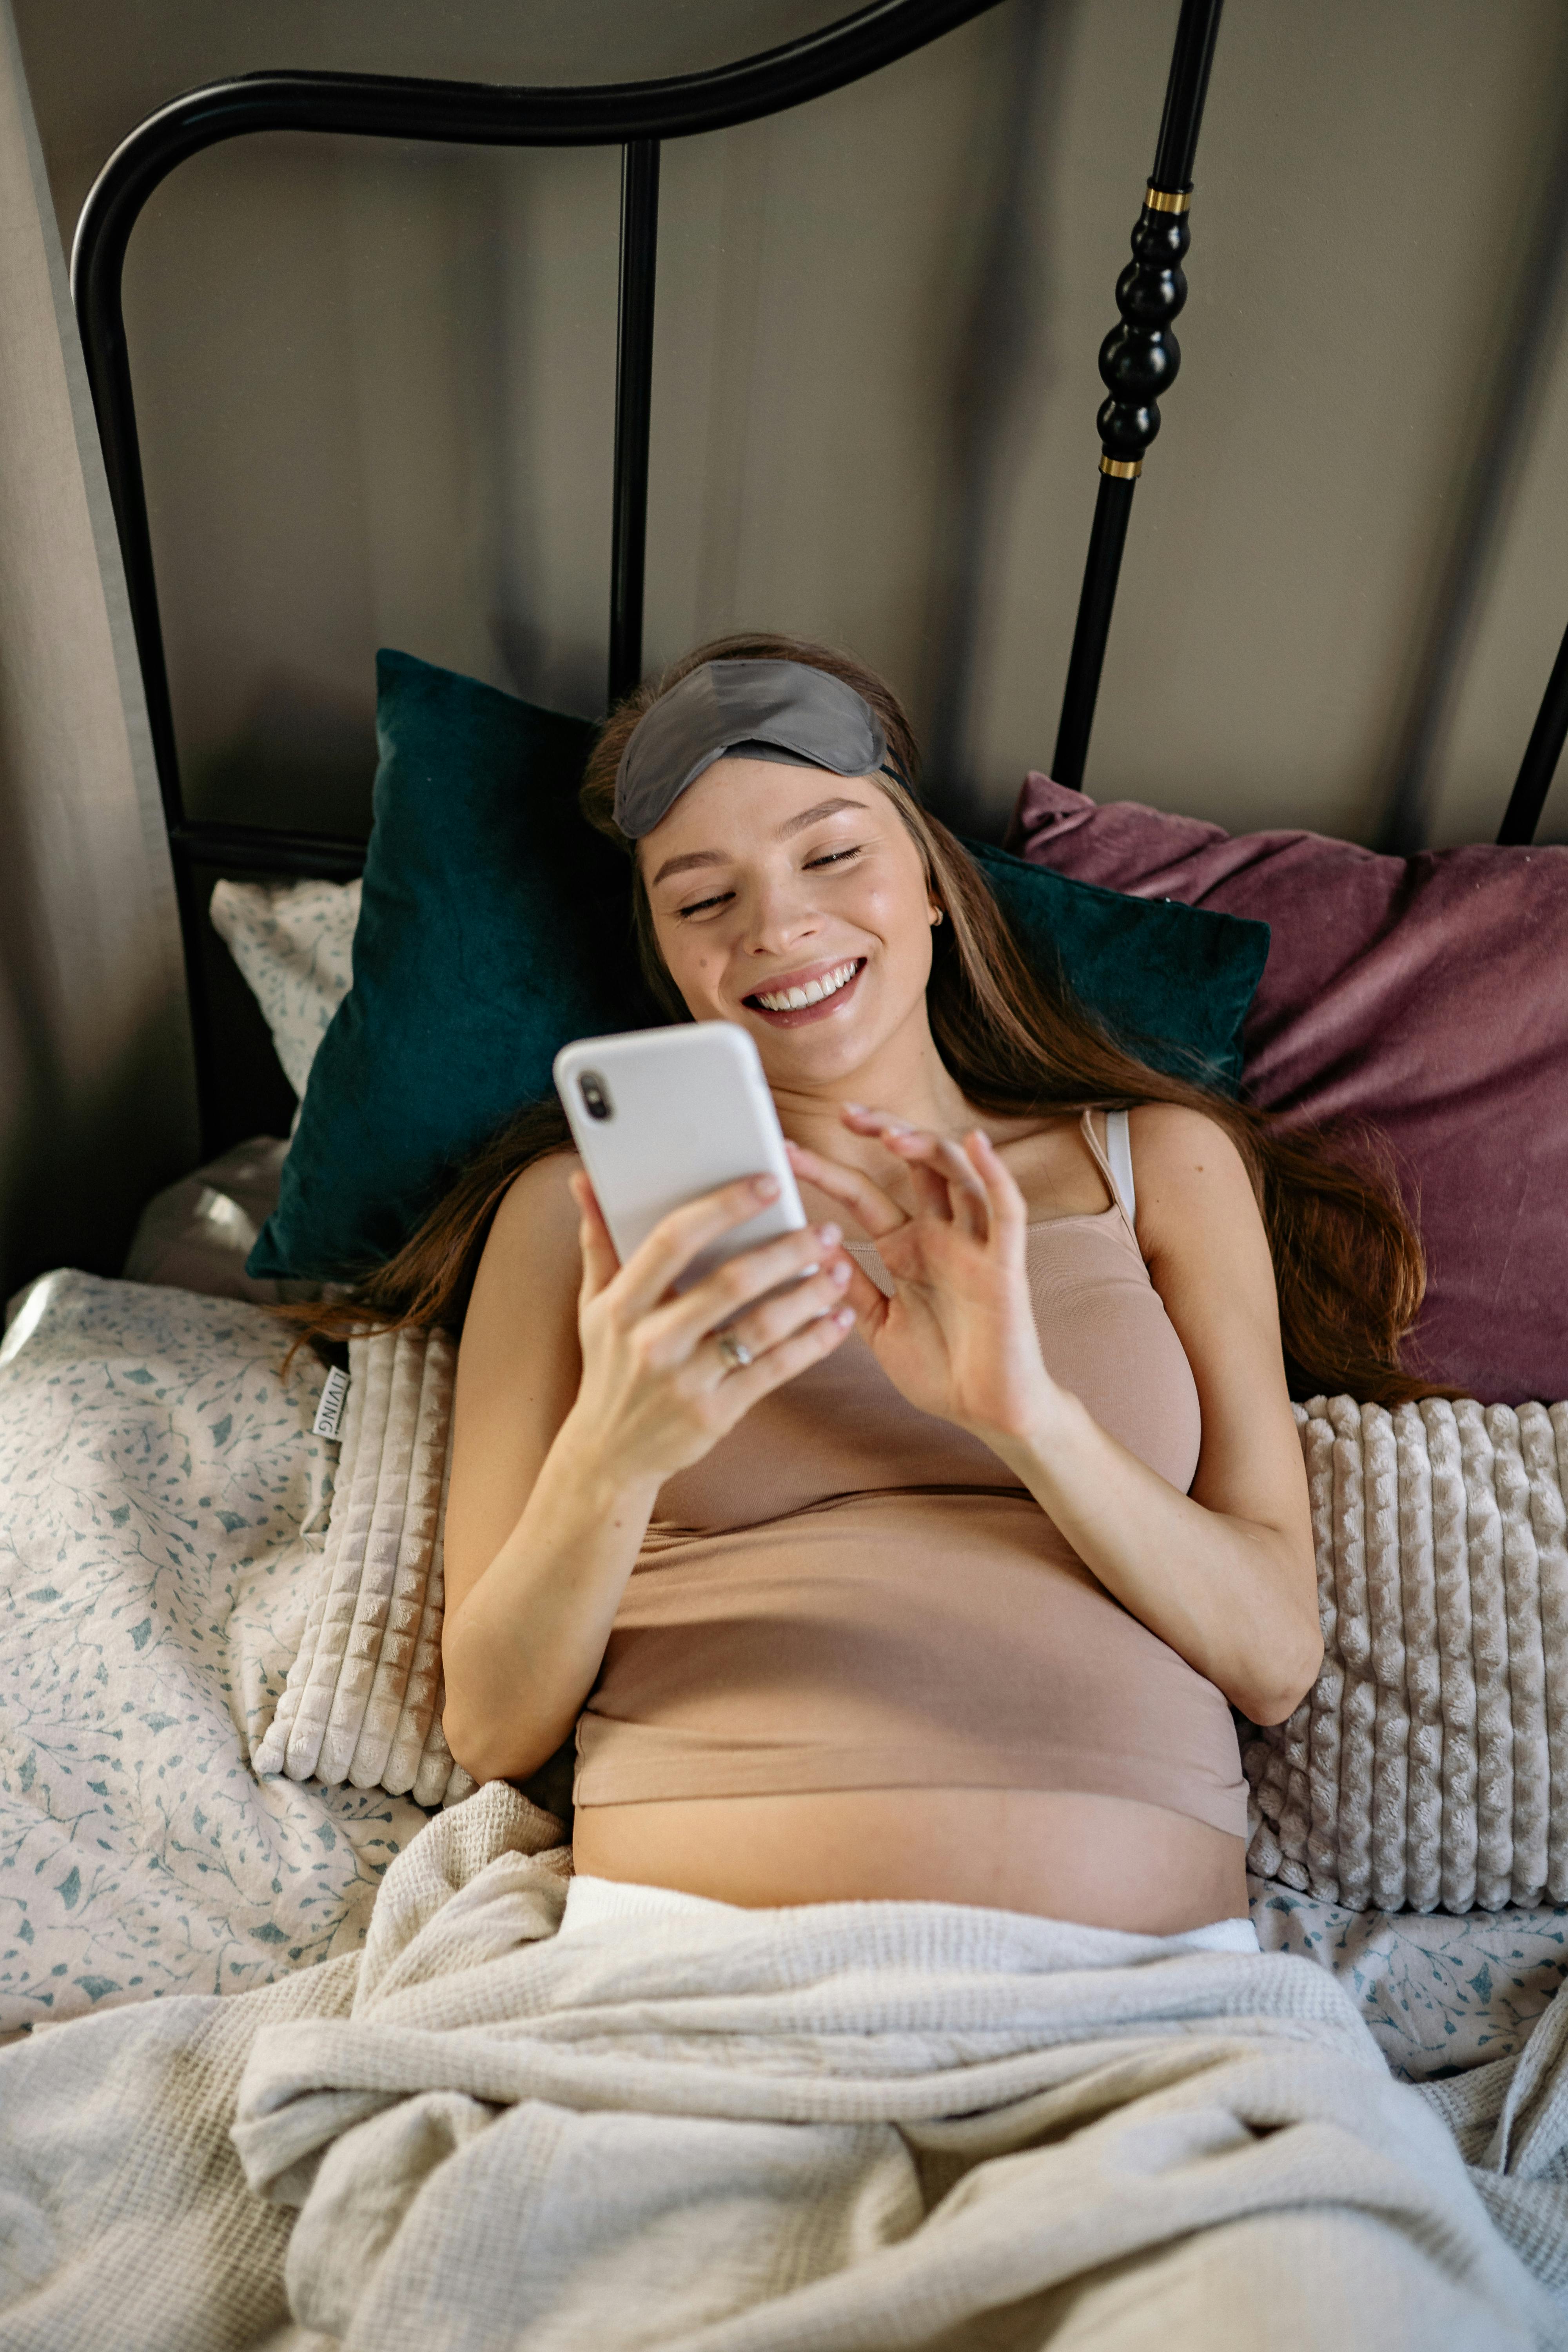 A smiling pregnant woman reading her phone in bed | Source: Pexels